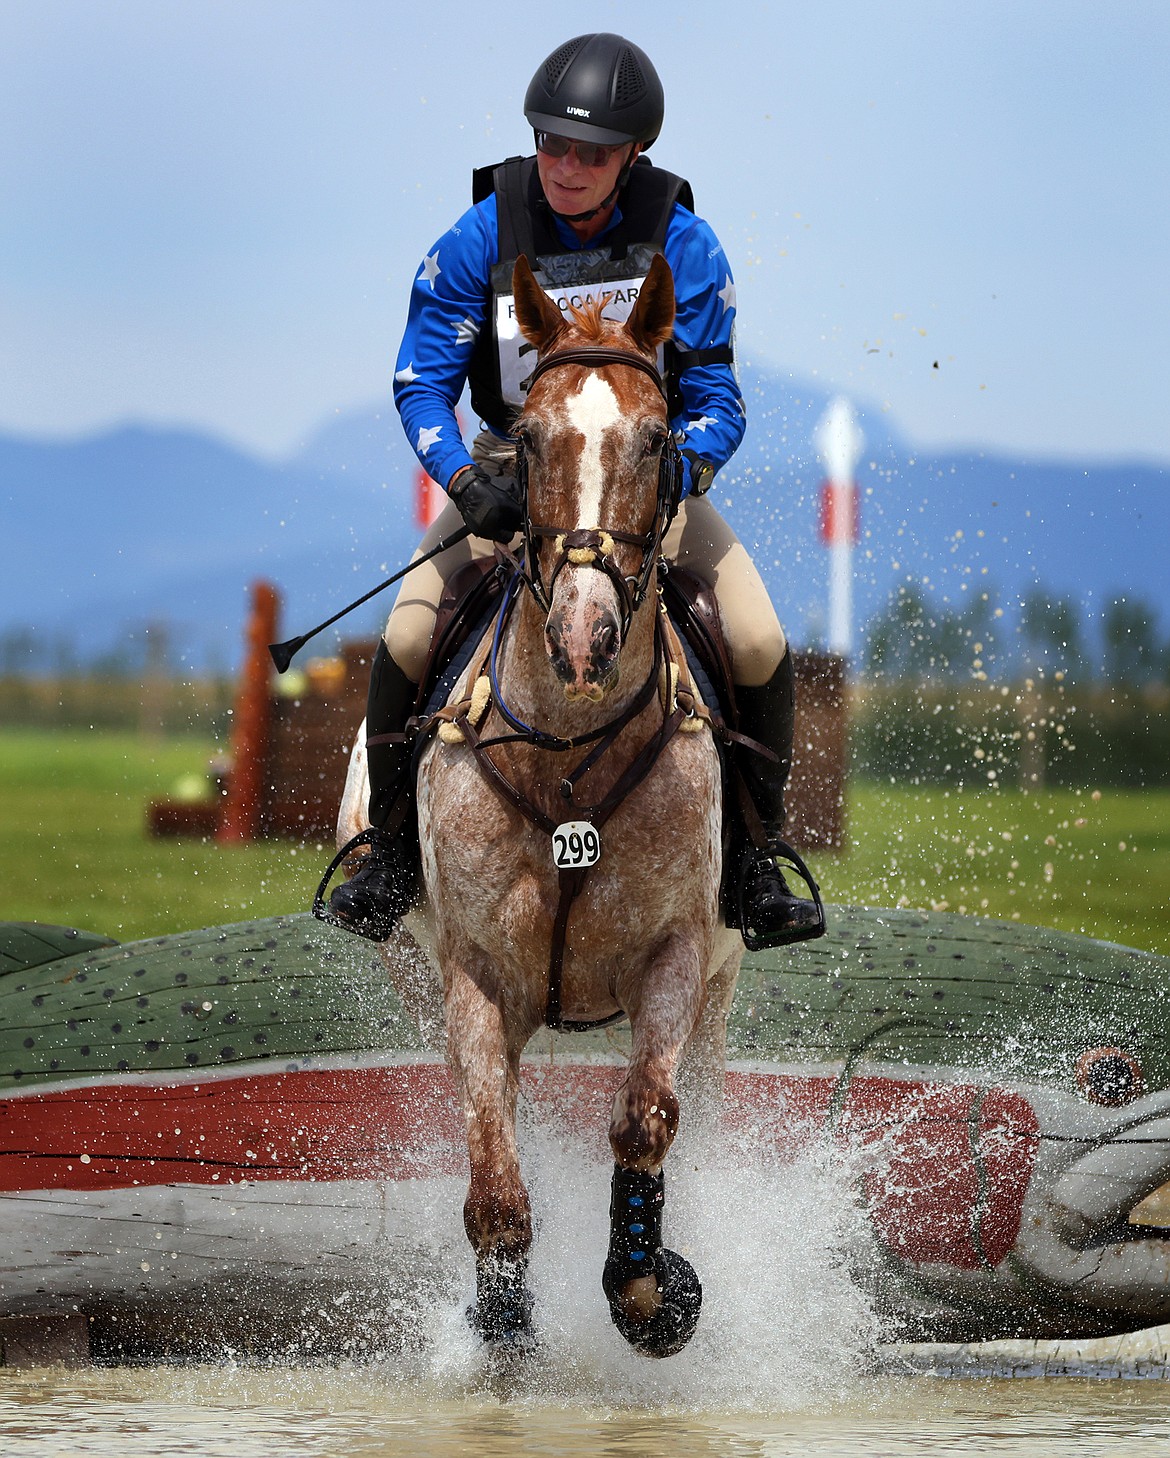 Craig Heckert rides "RF Arkenstone" through the first water feature of the Training division of The Event at Rebecca Farm July 22. (Jeremy Weber/Daily Inter Lake)